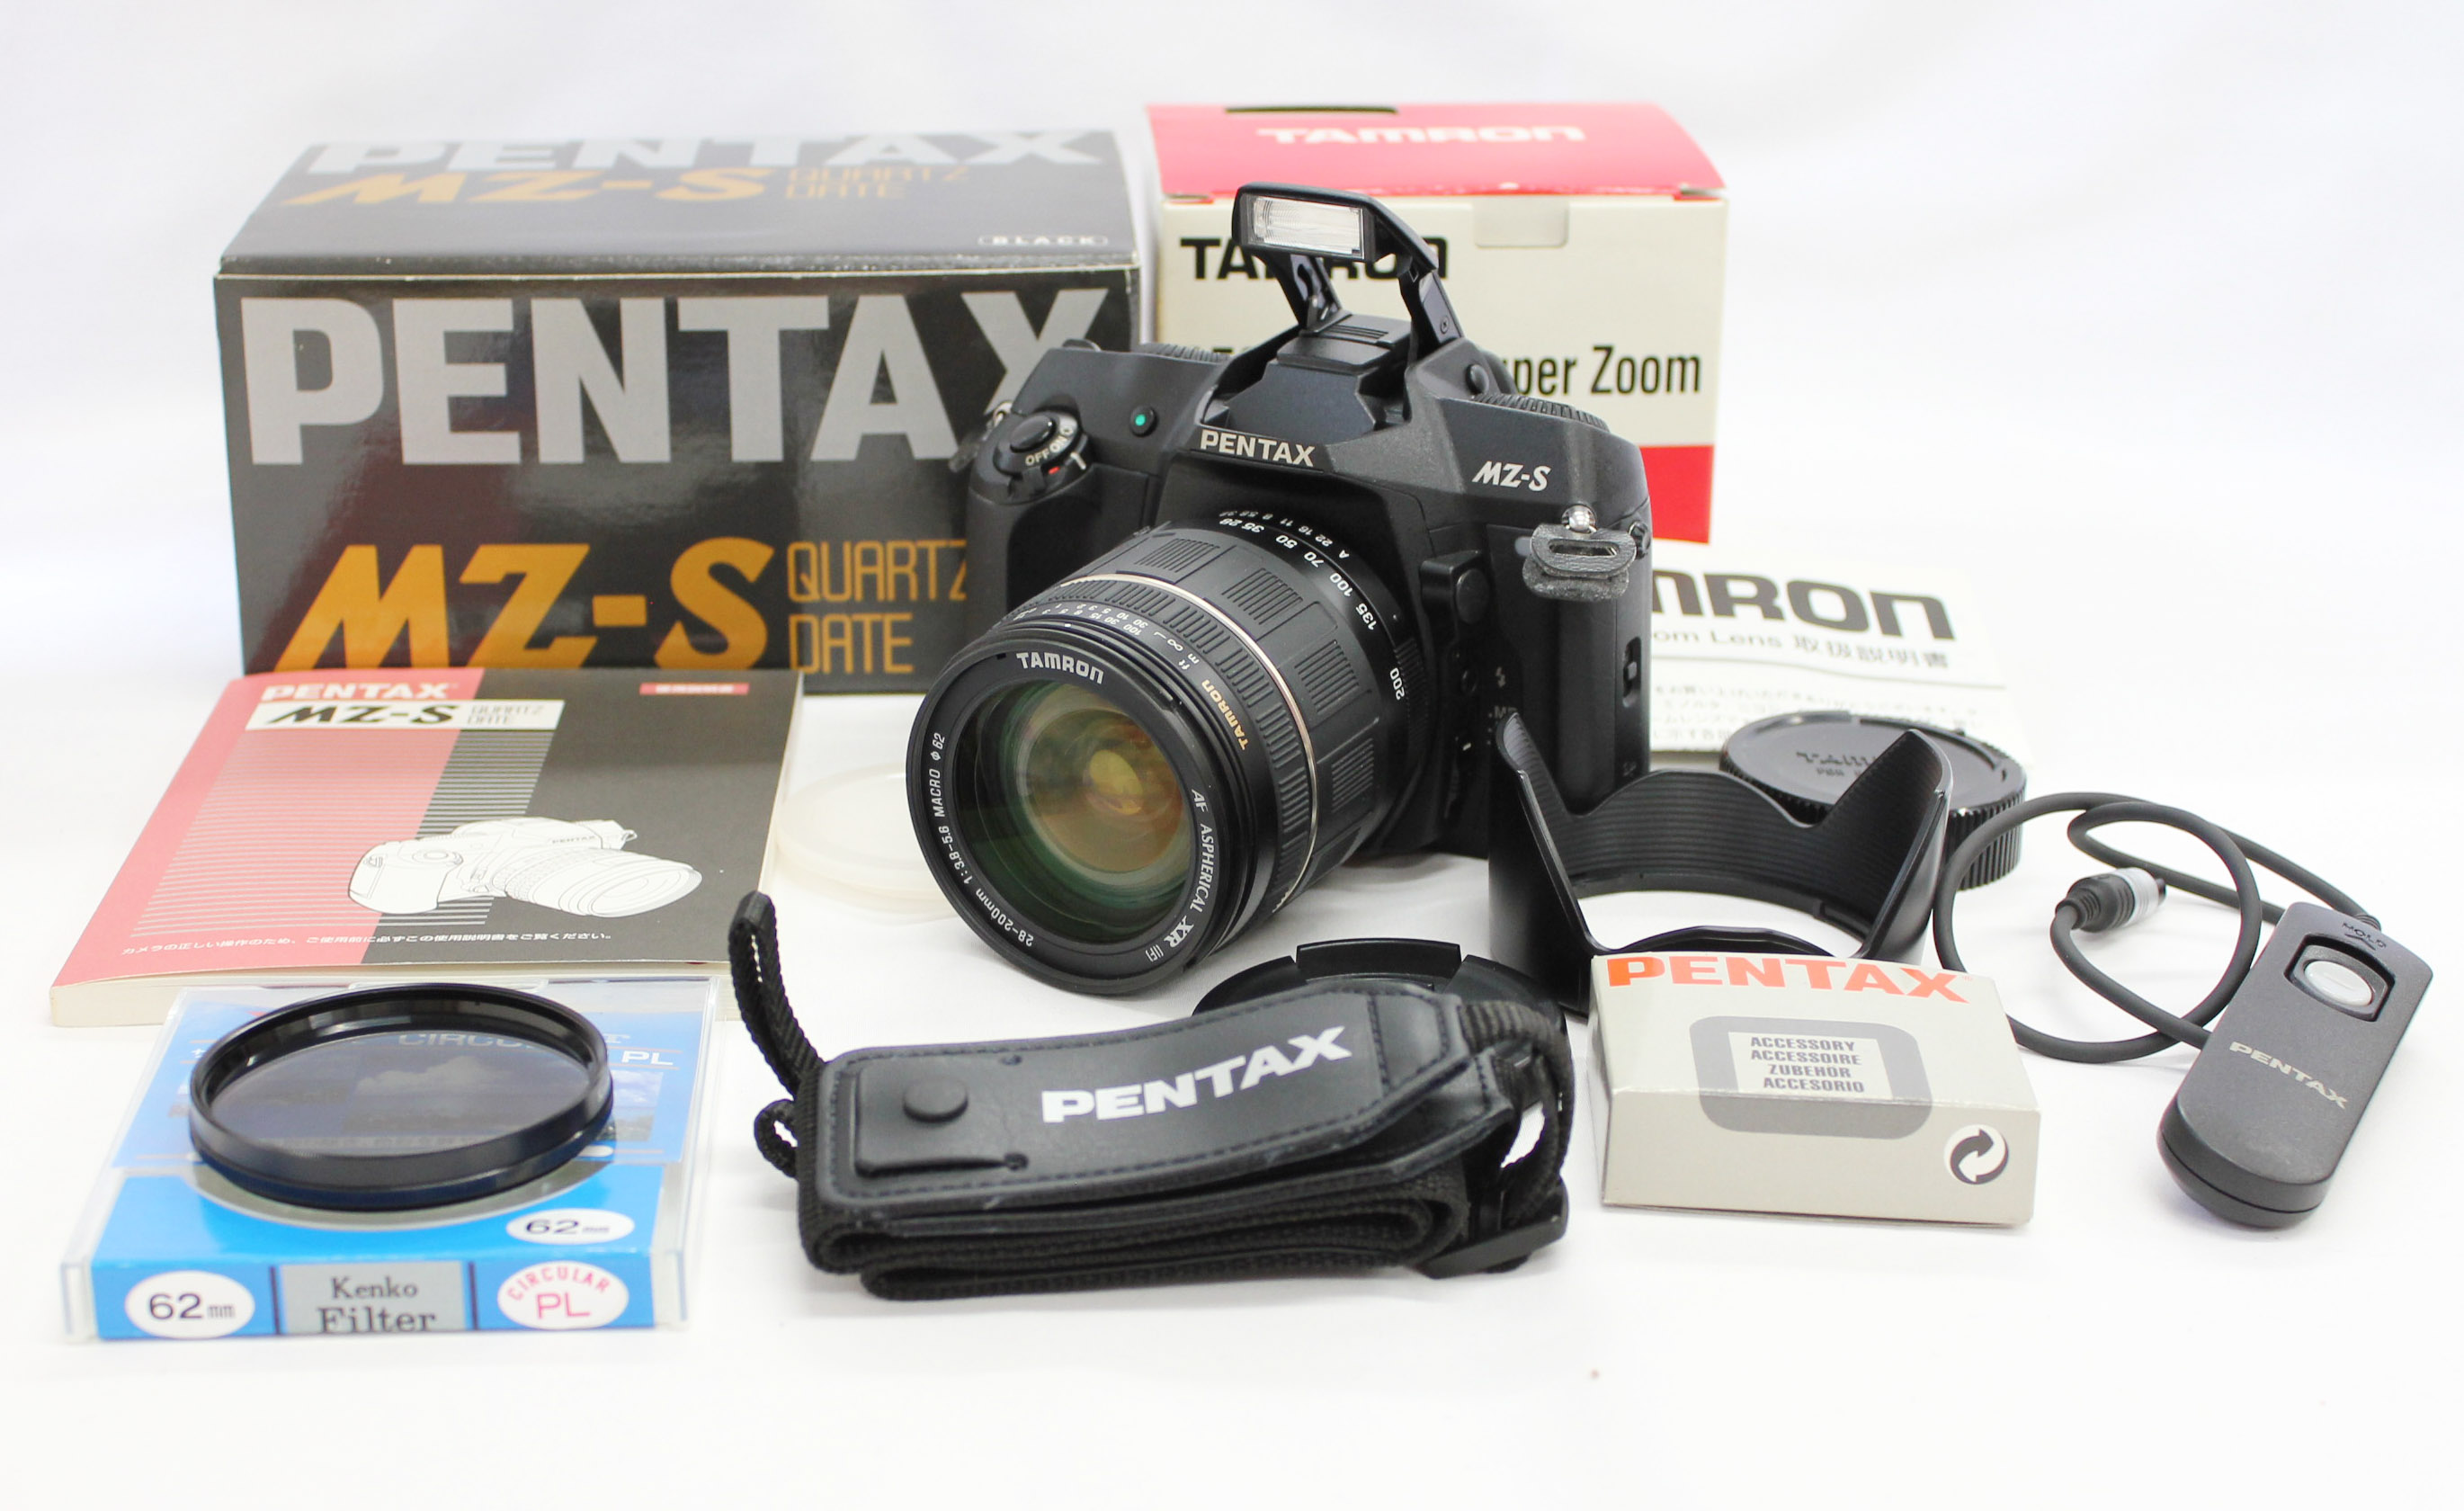 Japan Used Camera Shop | [Mint] Pentax MZ-S SLR Film Camera w/ Tamron AF 28-200mm F/3.8-5.6 Aspherical and more from Japan